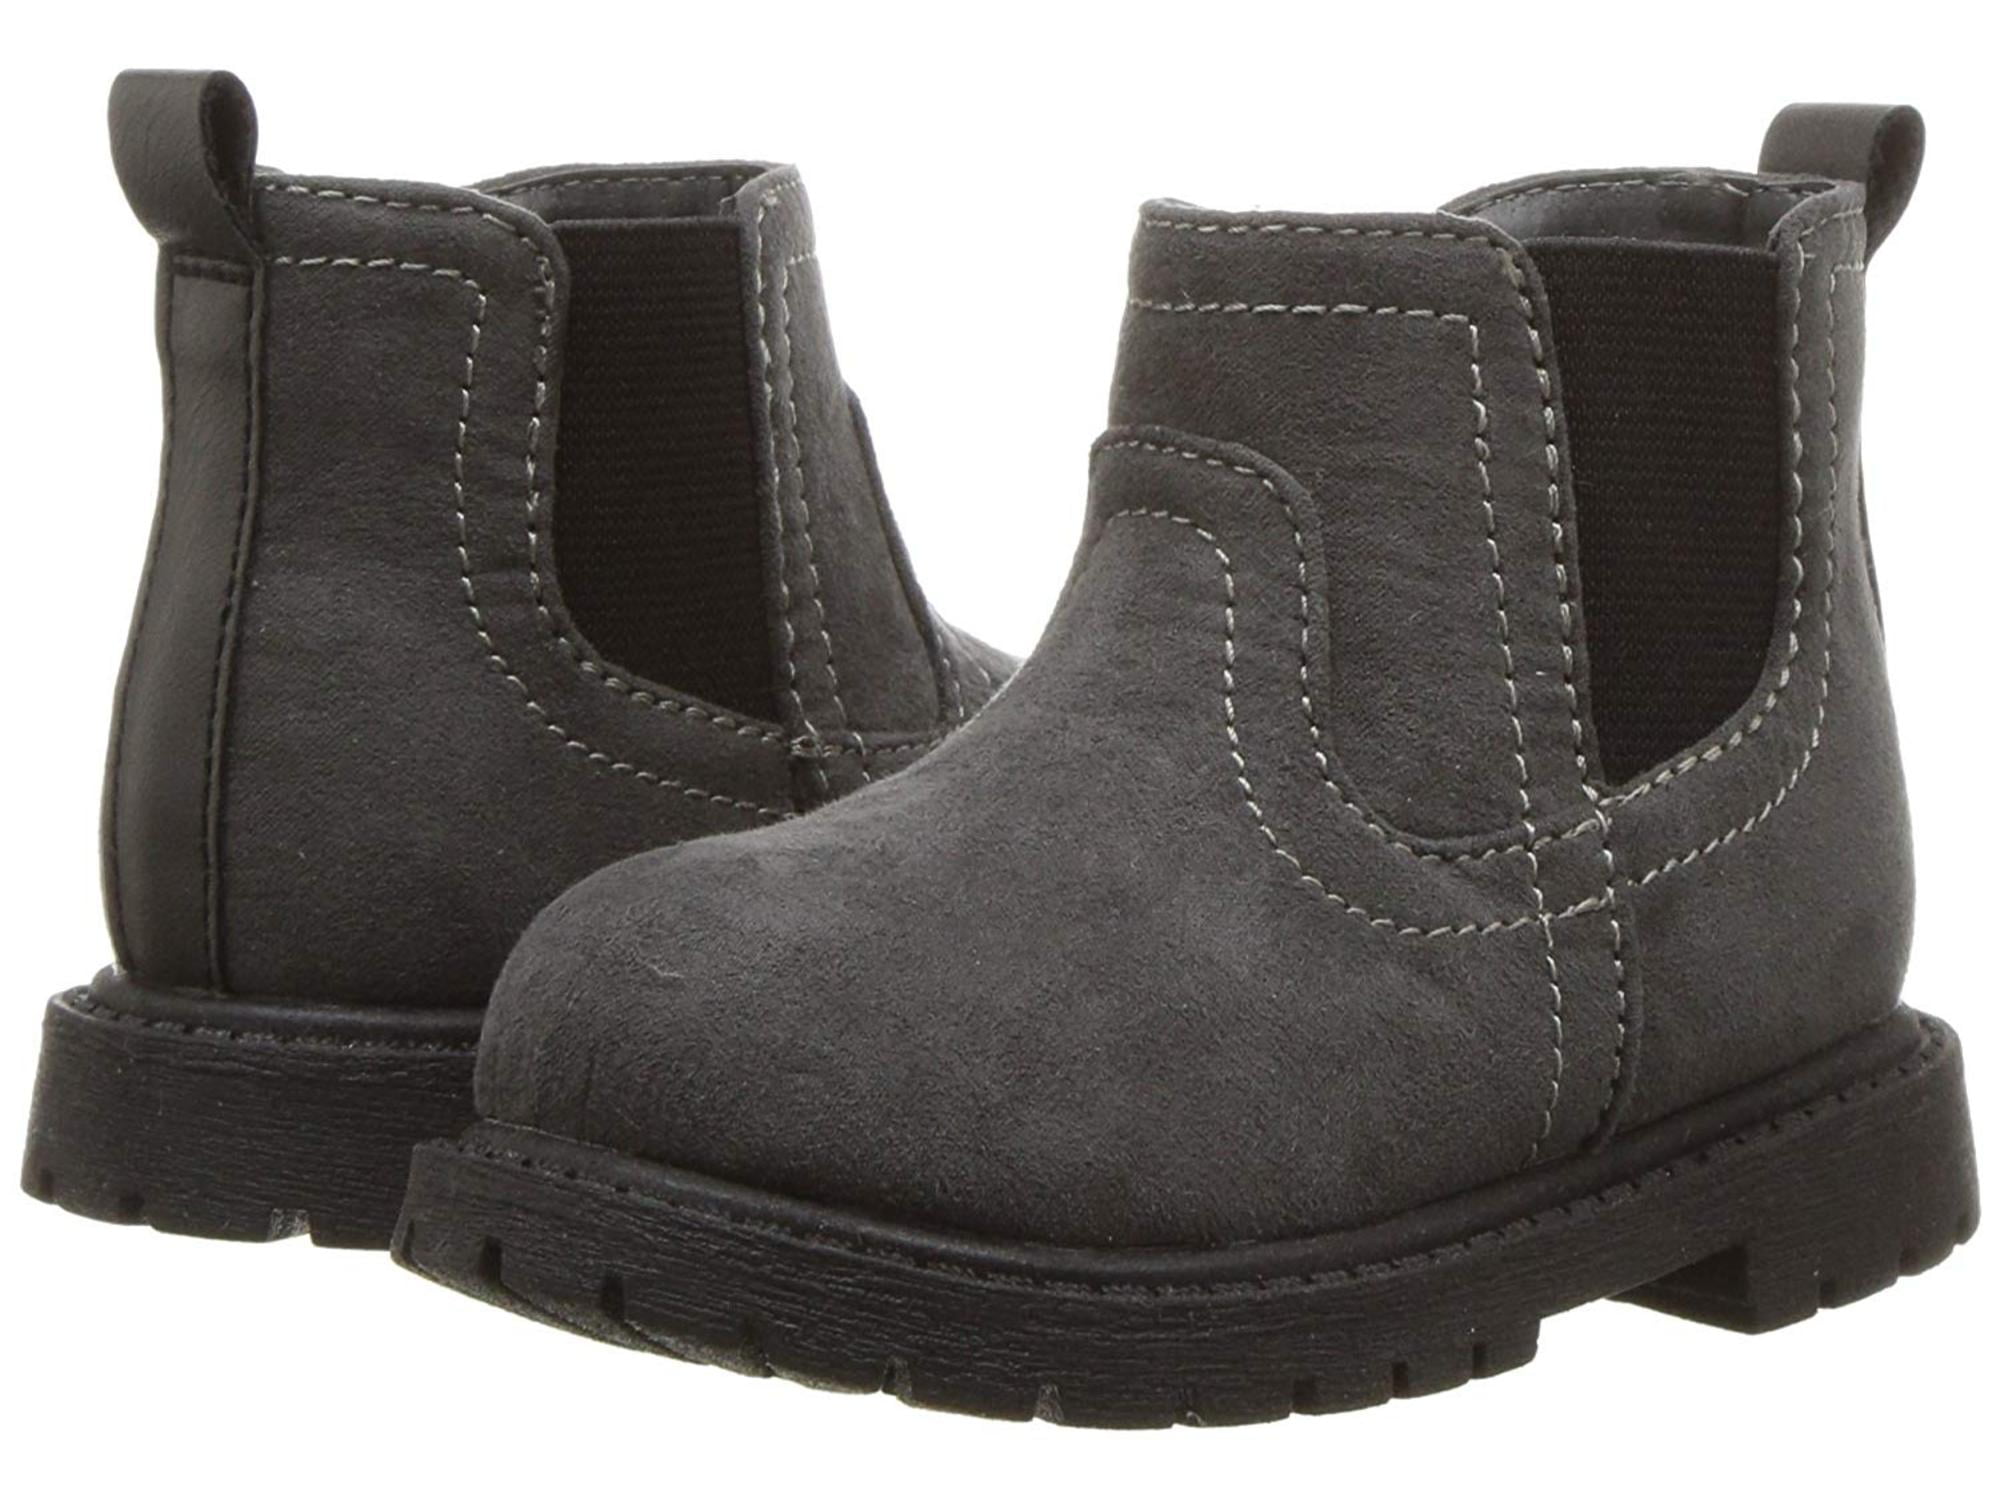 Carters Kids Boys Cooper3 Brown Chelsea Boot Fashion